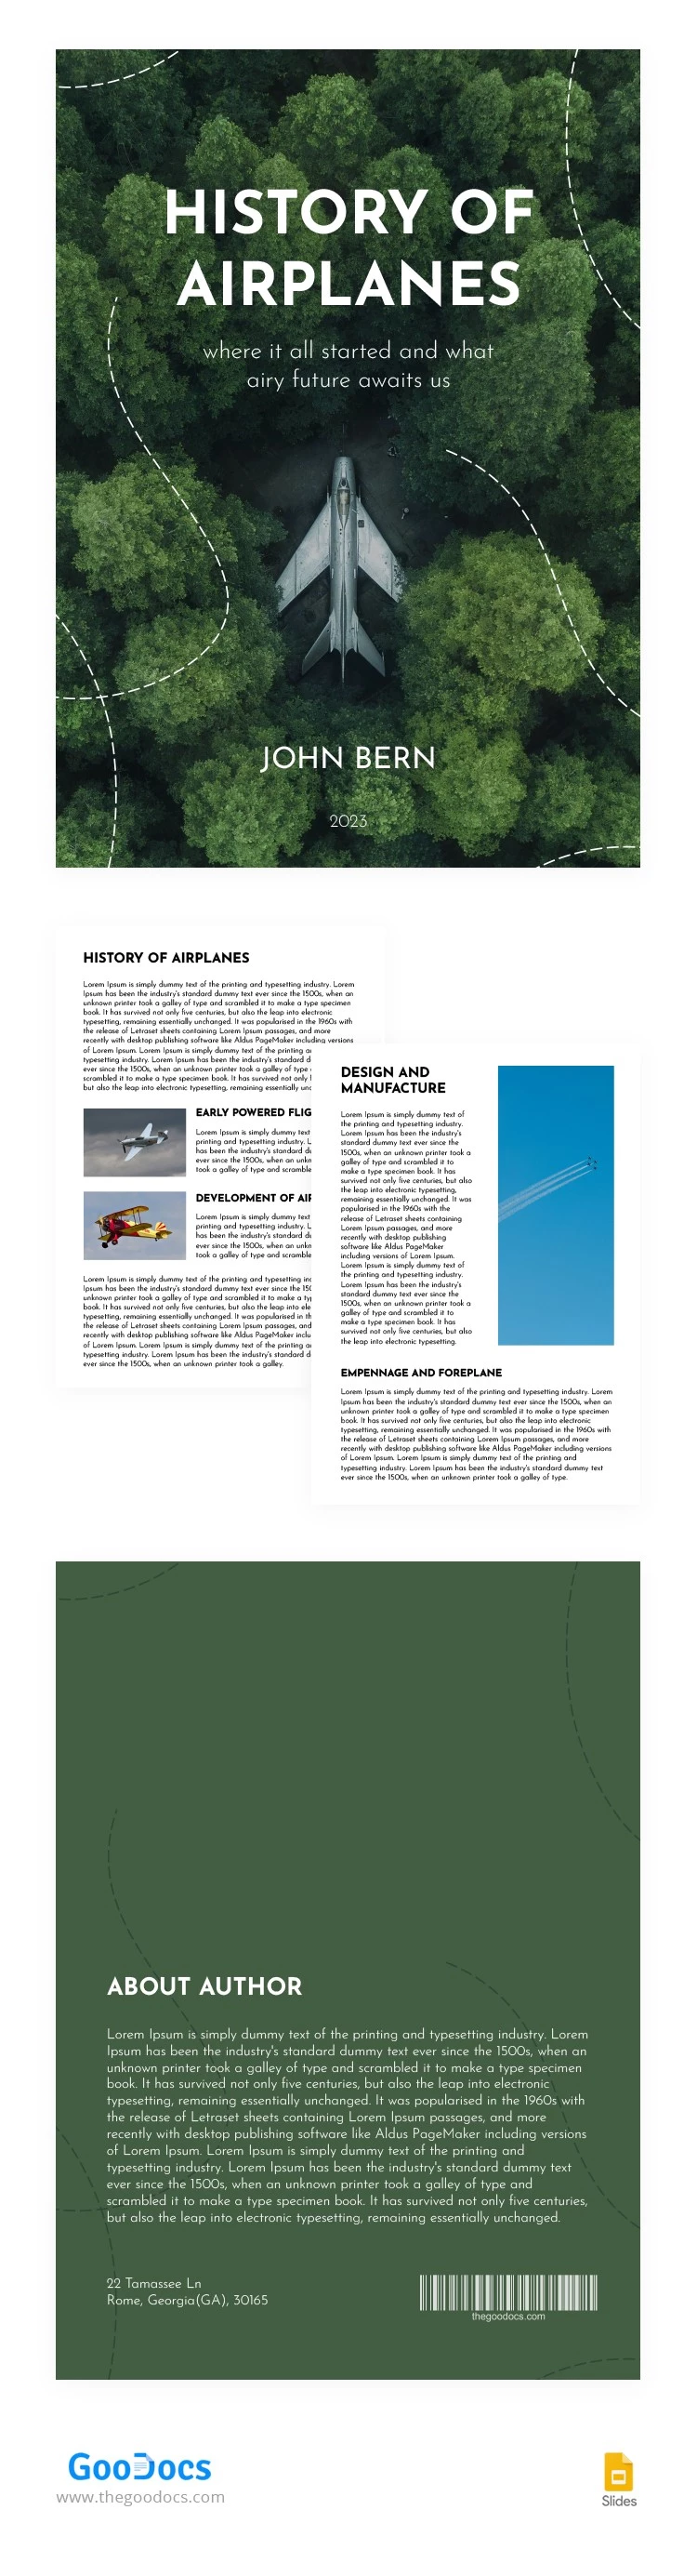 Airplanes Cover Books - free Google Docs Template - 10065278